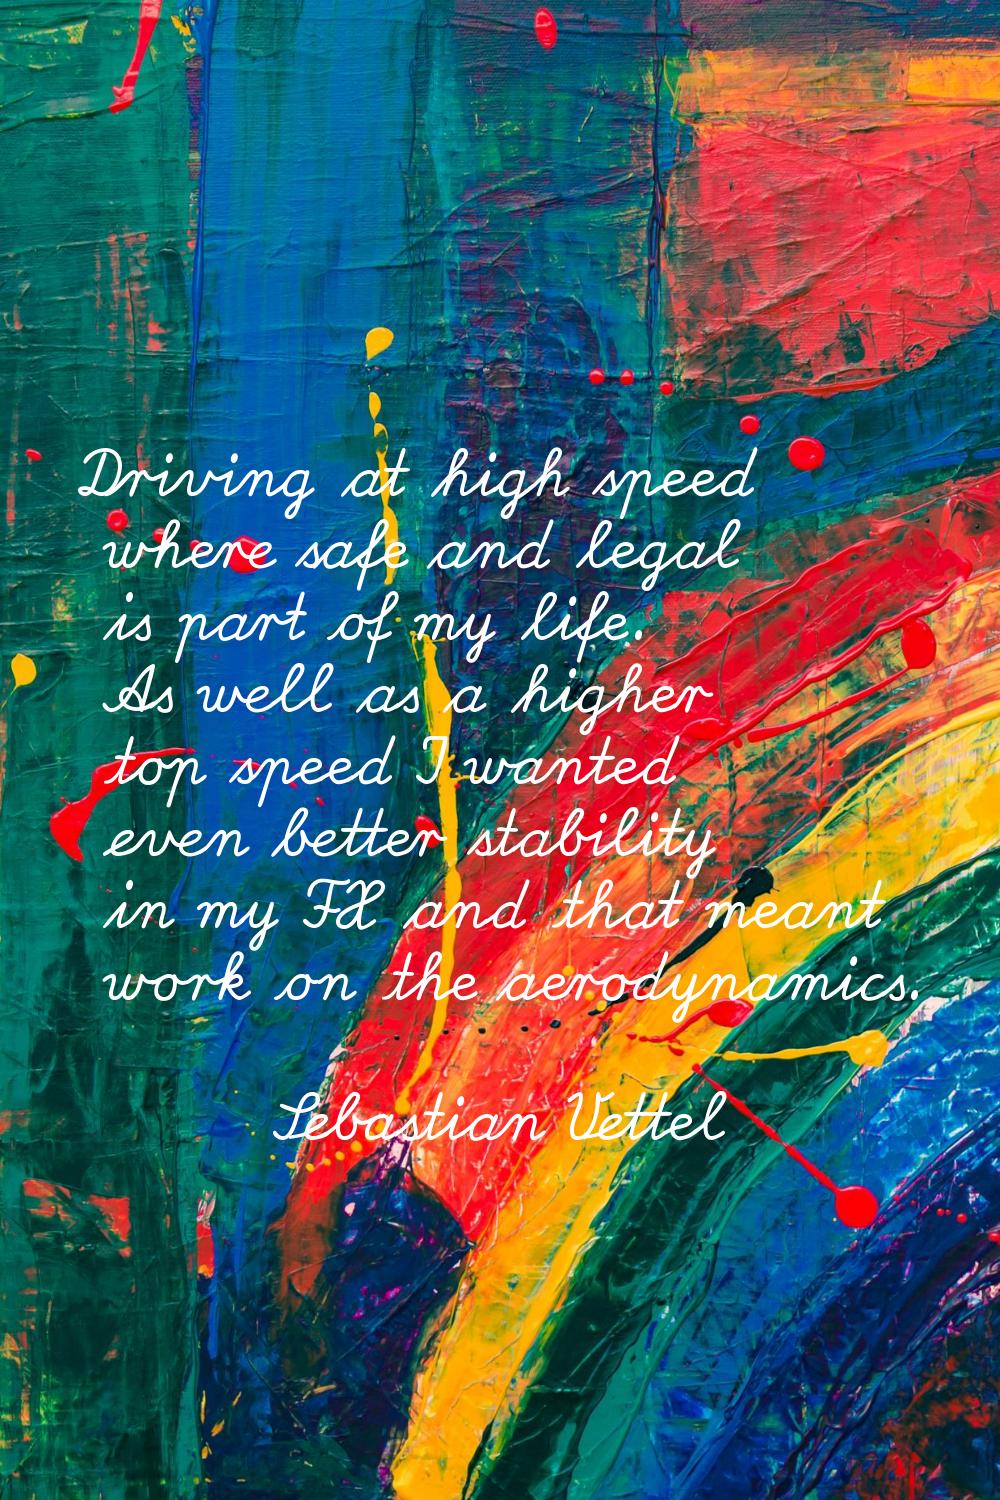 Driving at high speed where safe and legal is part of my life. As well as a higher top speed I want